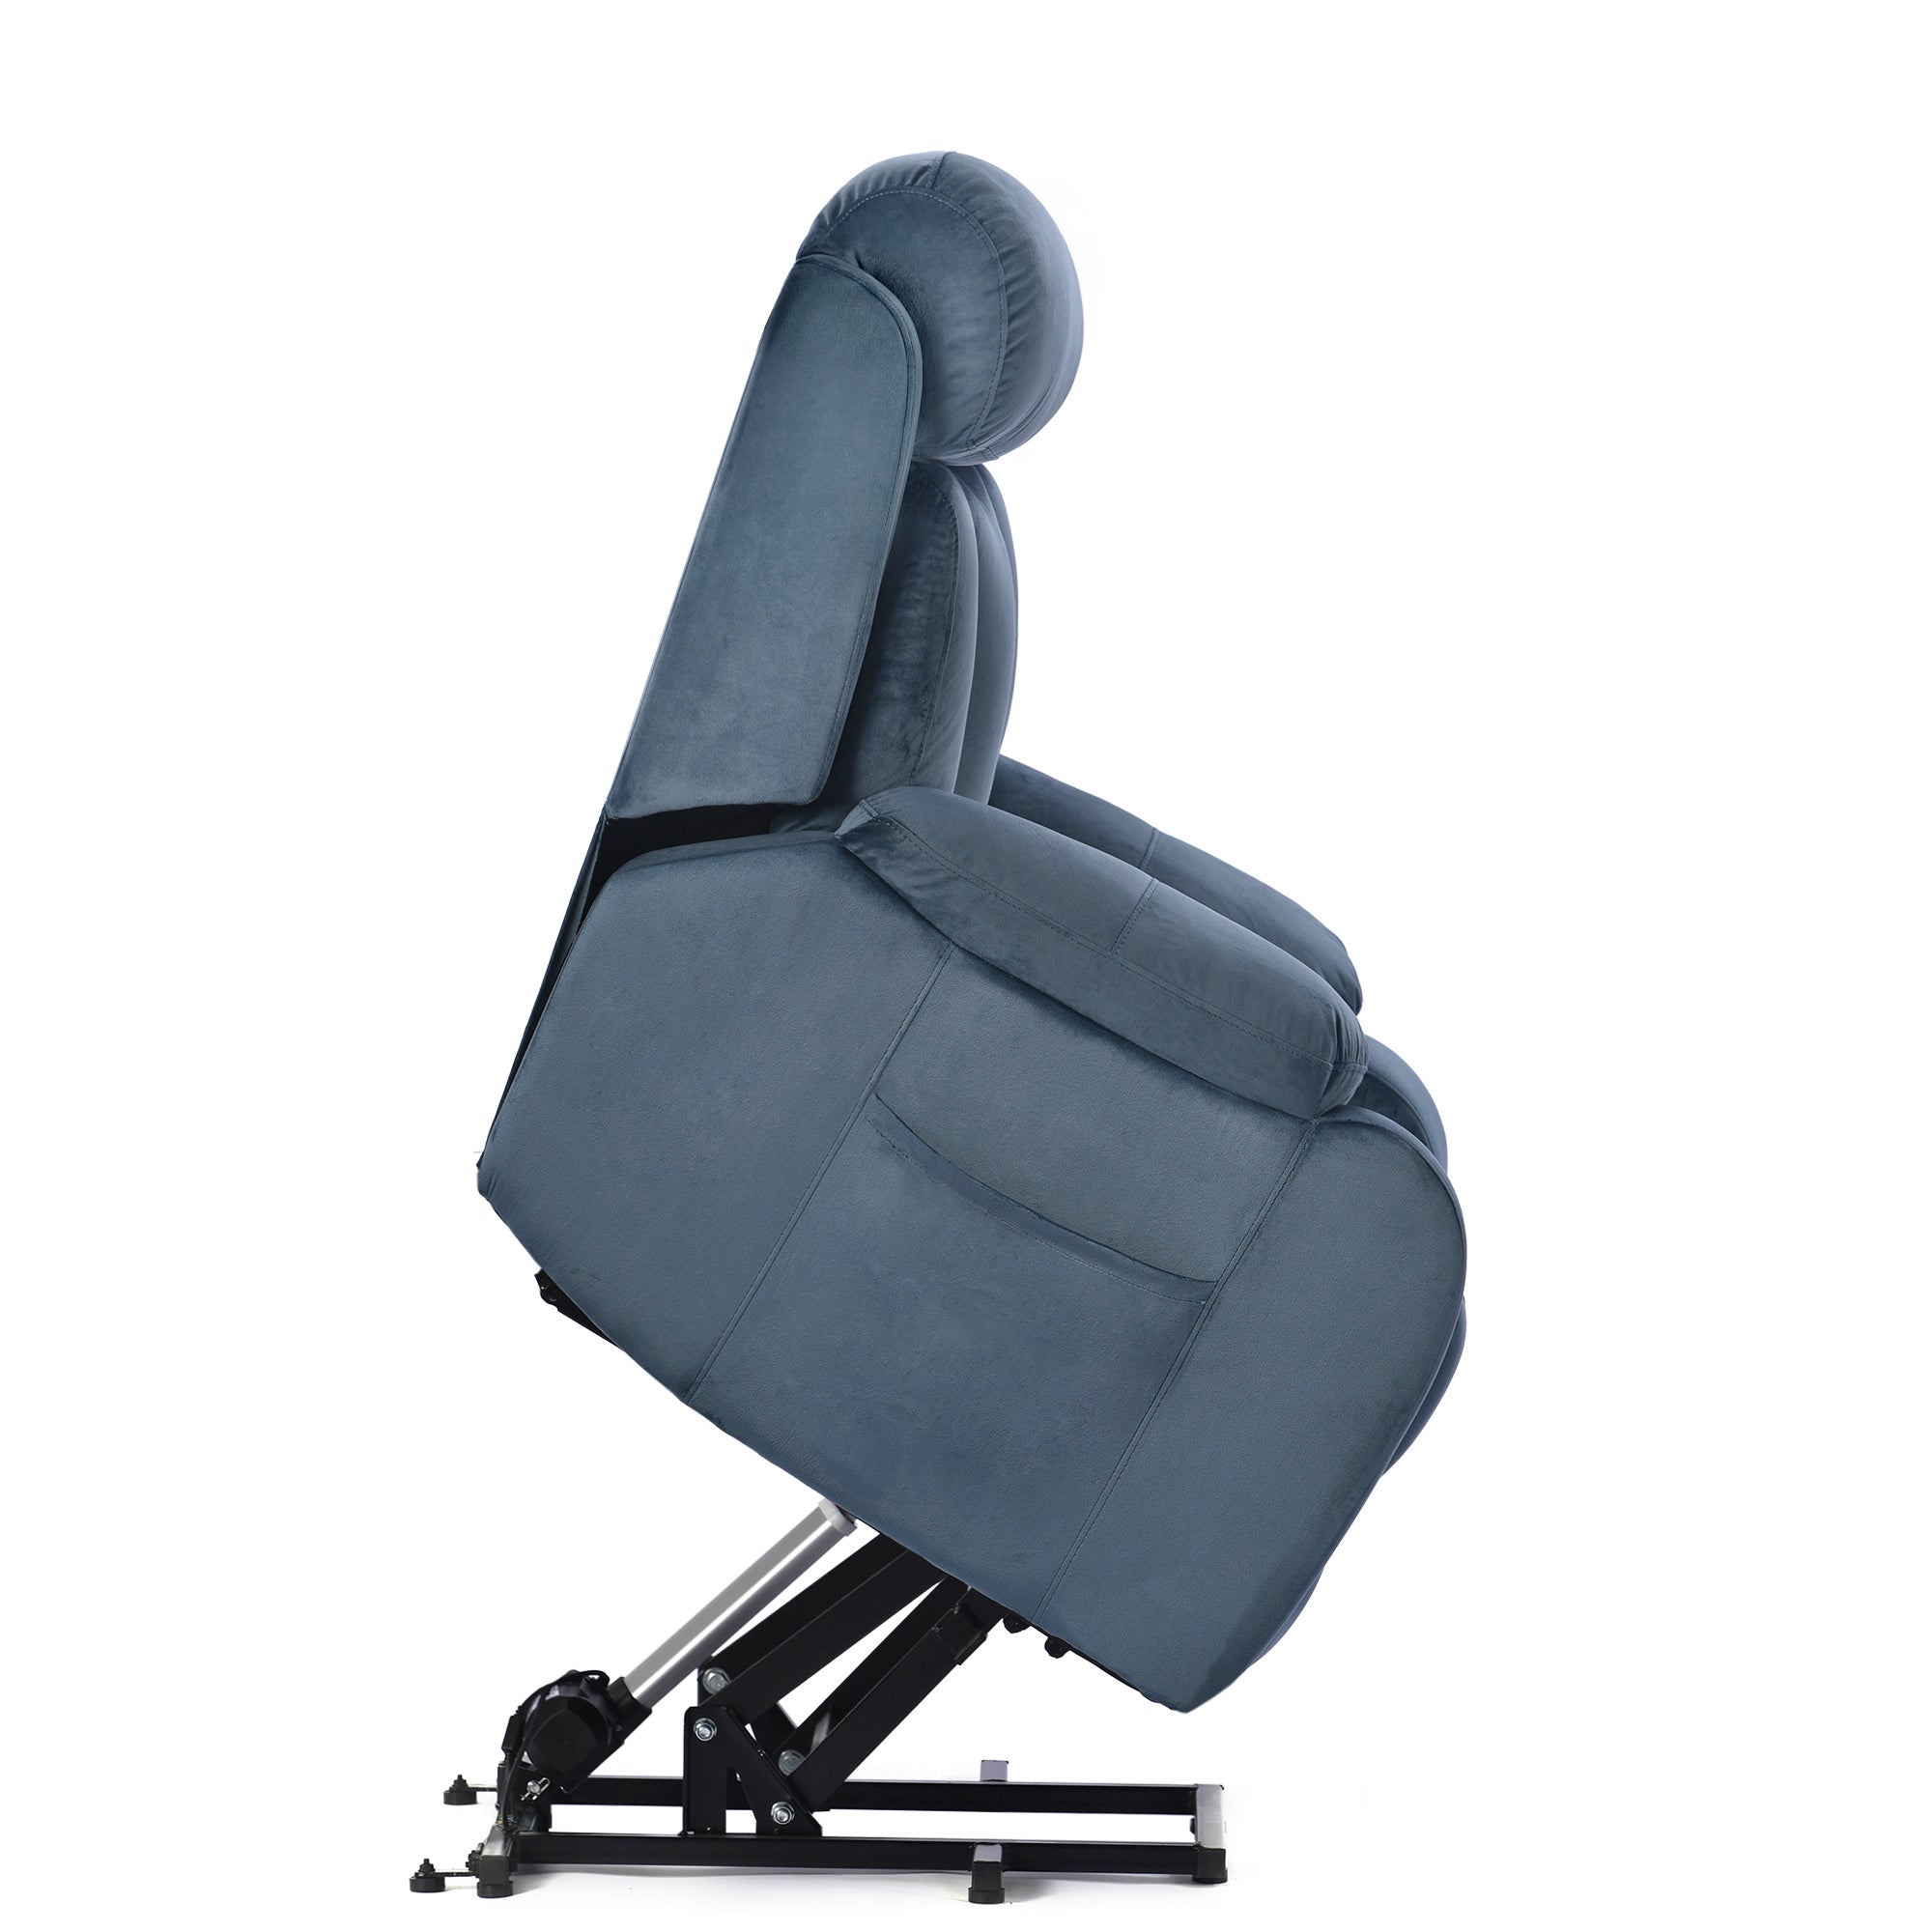 Lift Chair Recliner with Australia Cashmere Fabric, side view lifted